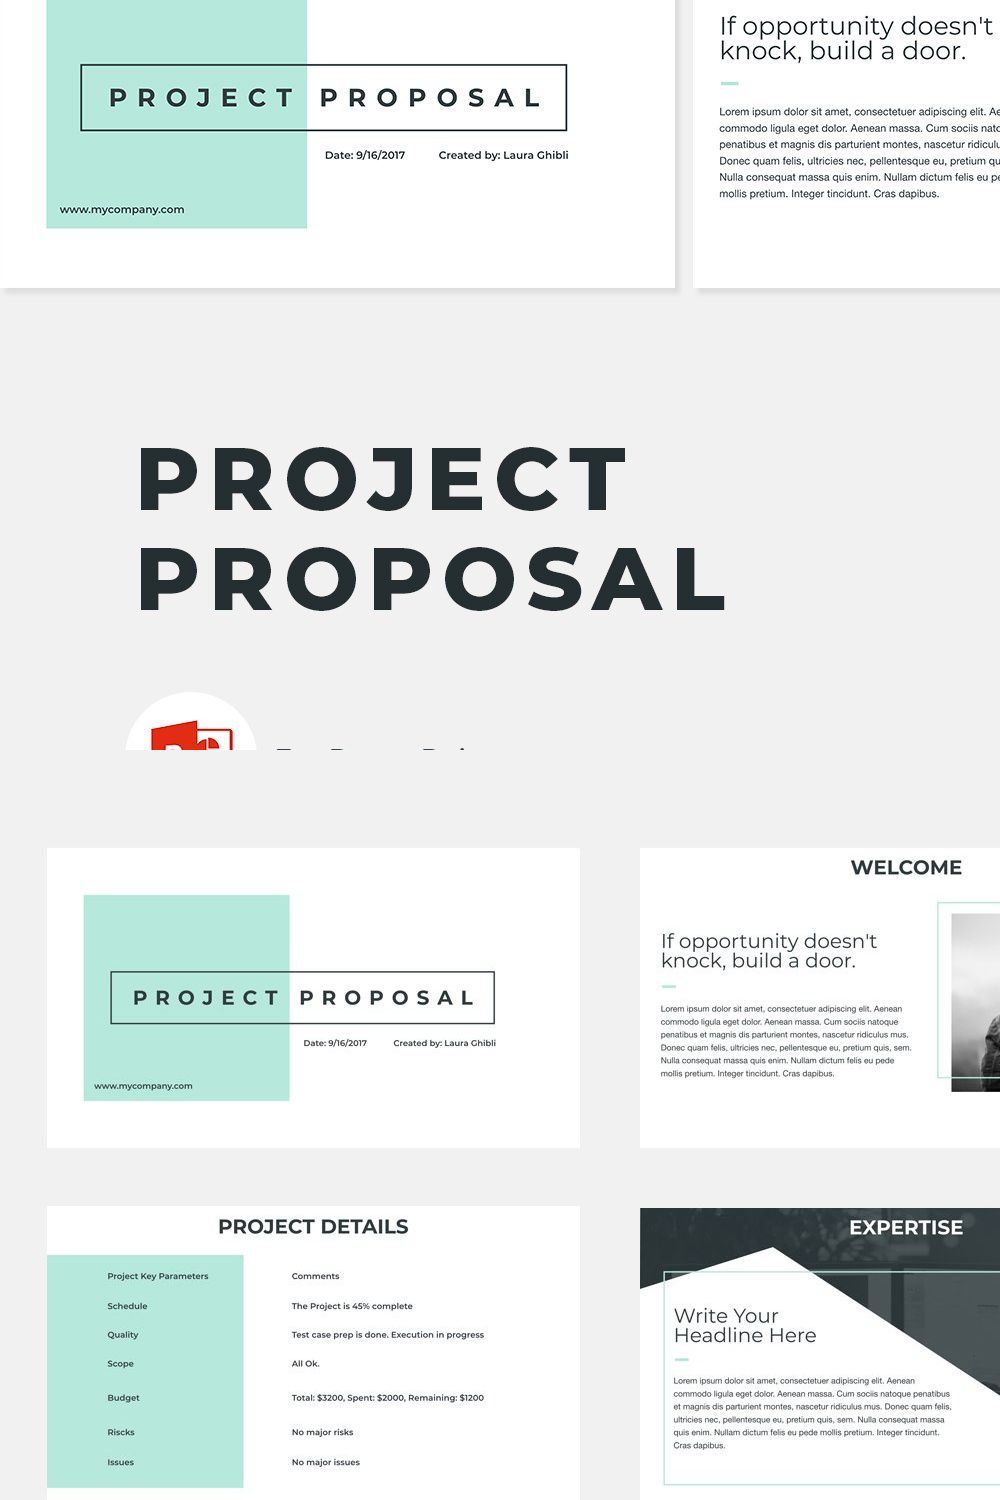 Project Proposal PowerPoint Template pinterest preview image.